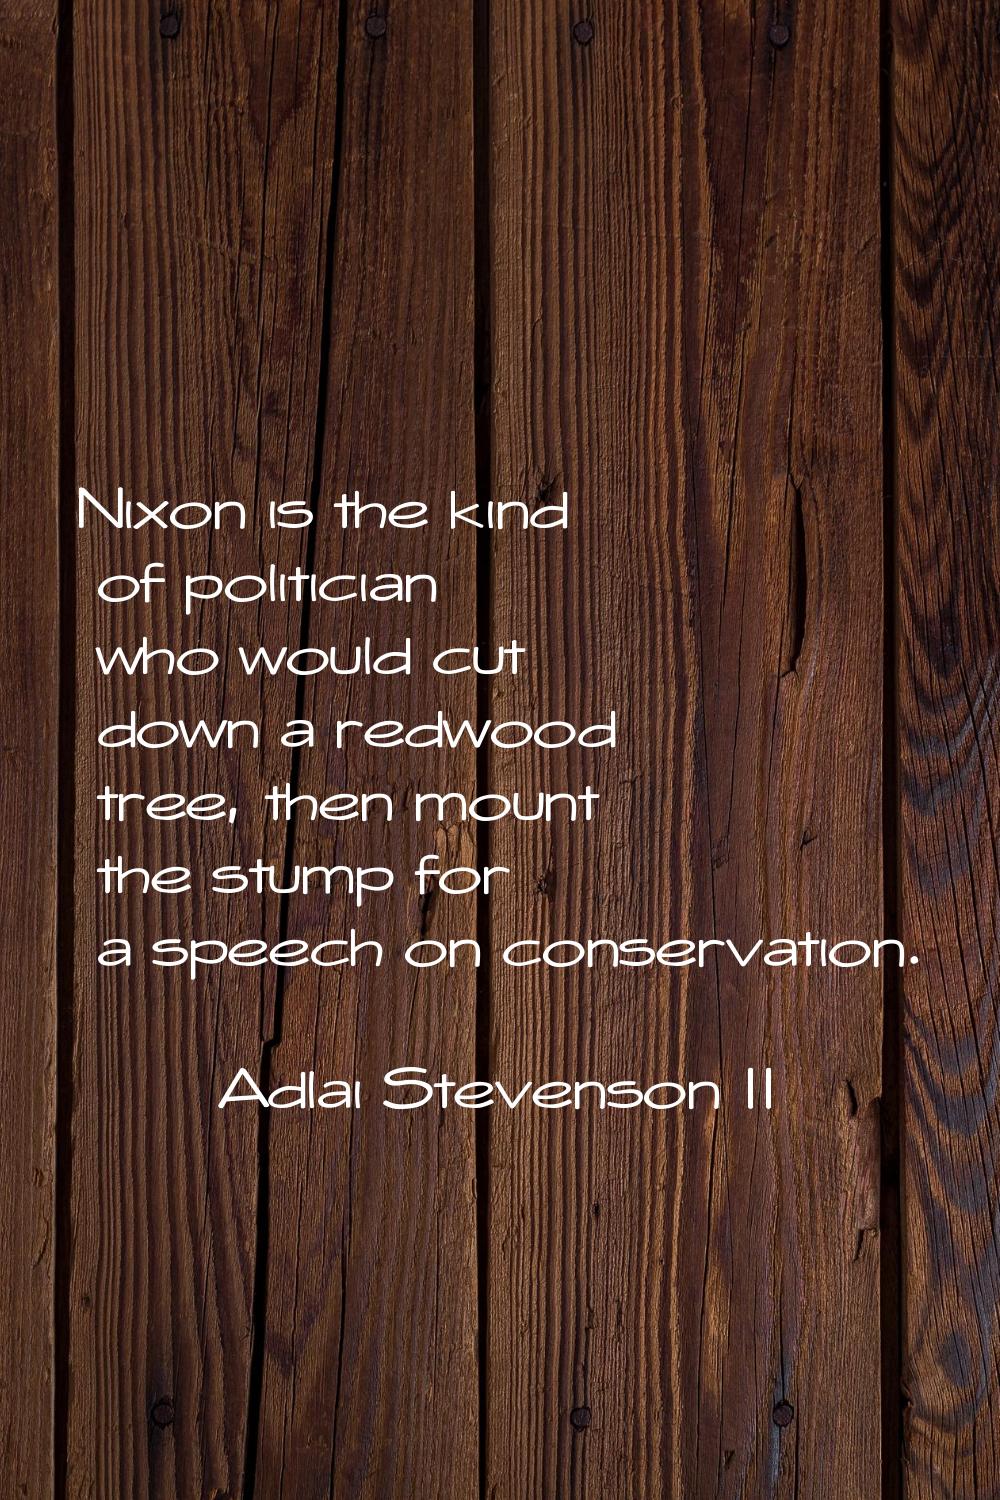 Nixon is the kind of politician who would cut down a redwood tree, then mount the stump for a speec